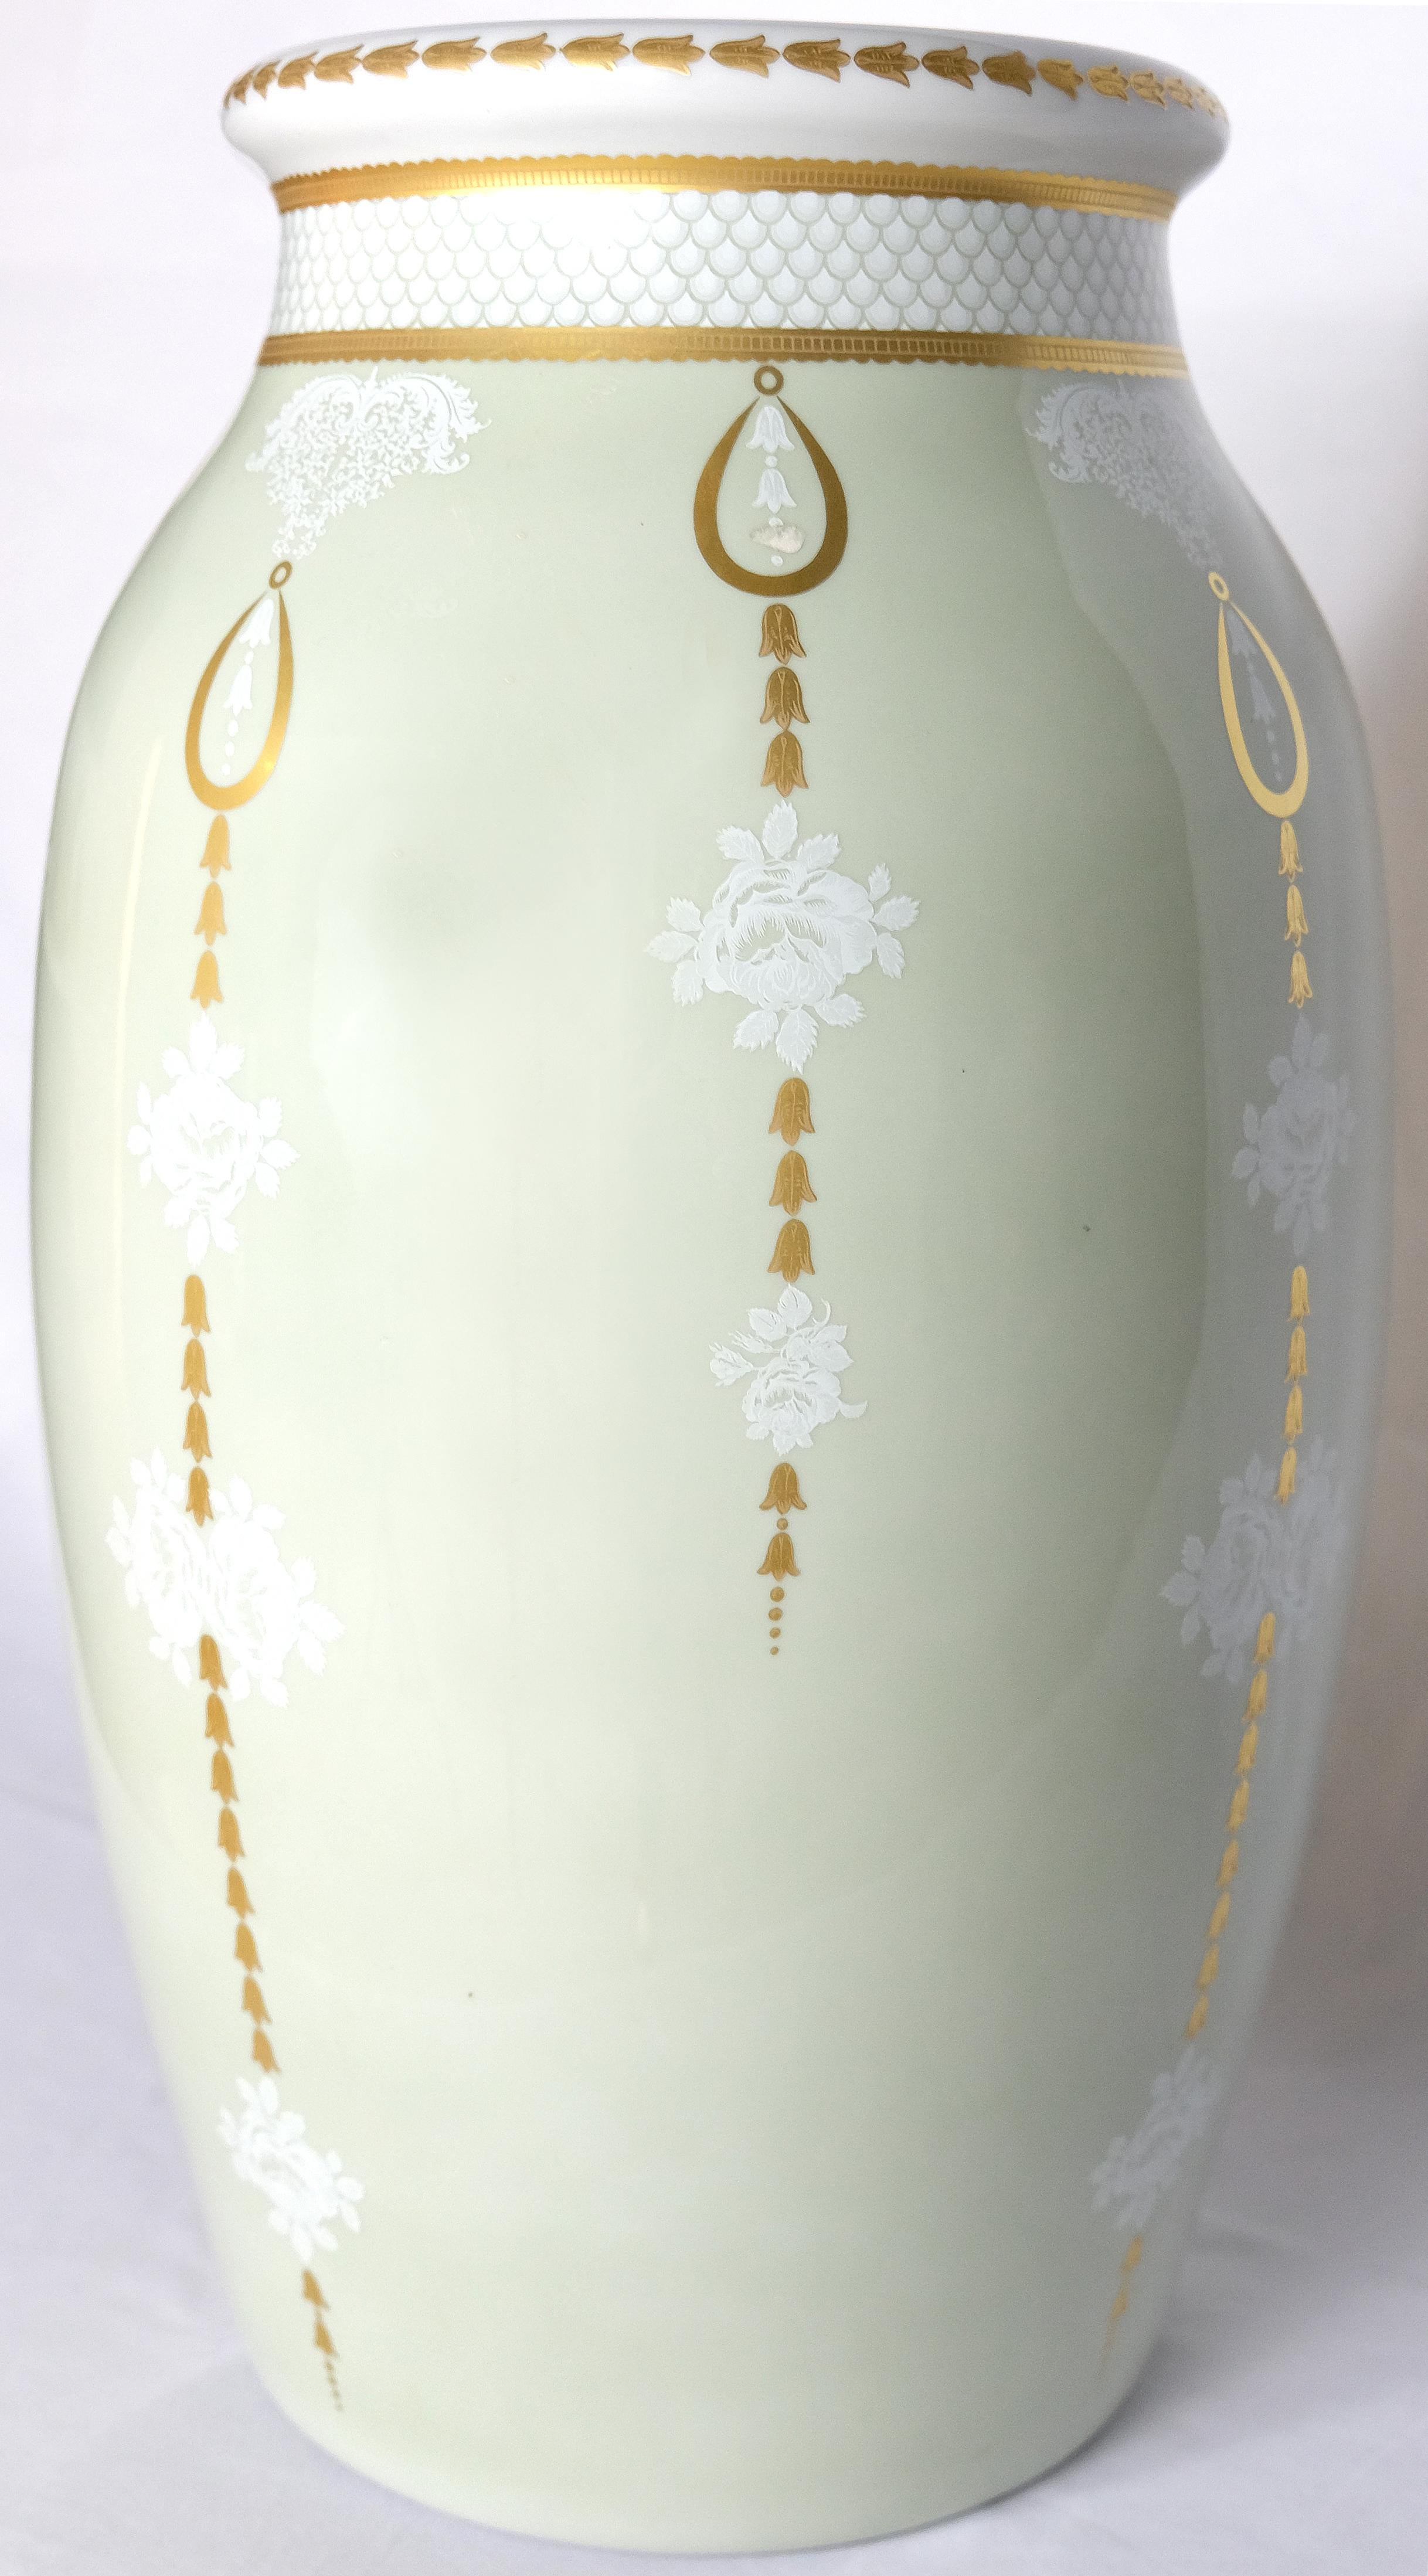 Mangani, Italy Classical Vase or Urn Form Porcelain Umbrella Stand 

Offered for sale is an elegant porcelain vase or urn form umbrella stand from Mangani of Italy. The umbrella stand is glazed in subtle colors and accented in gold. The maker's mark